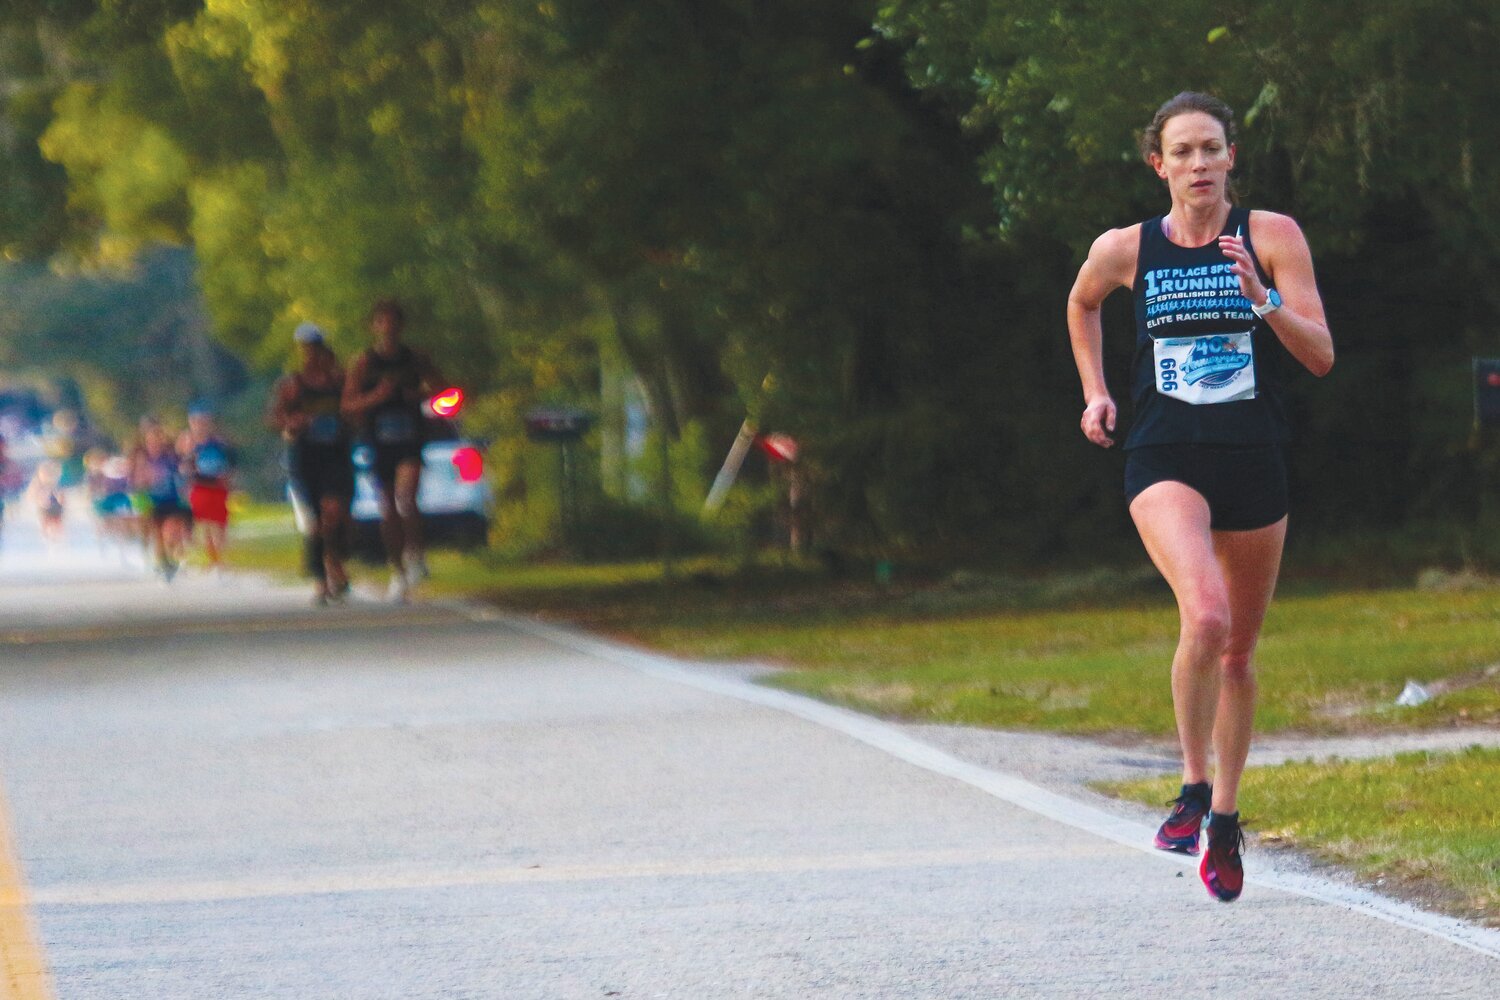 As a member of the 1st Place Sports elite racing team, Alexandra Midgett is seen here with a powerful stride in the Thanksgiving Day Distance Classic Half Marathon where she finished third female; and 21st overall.